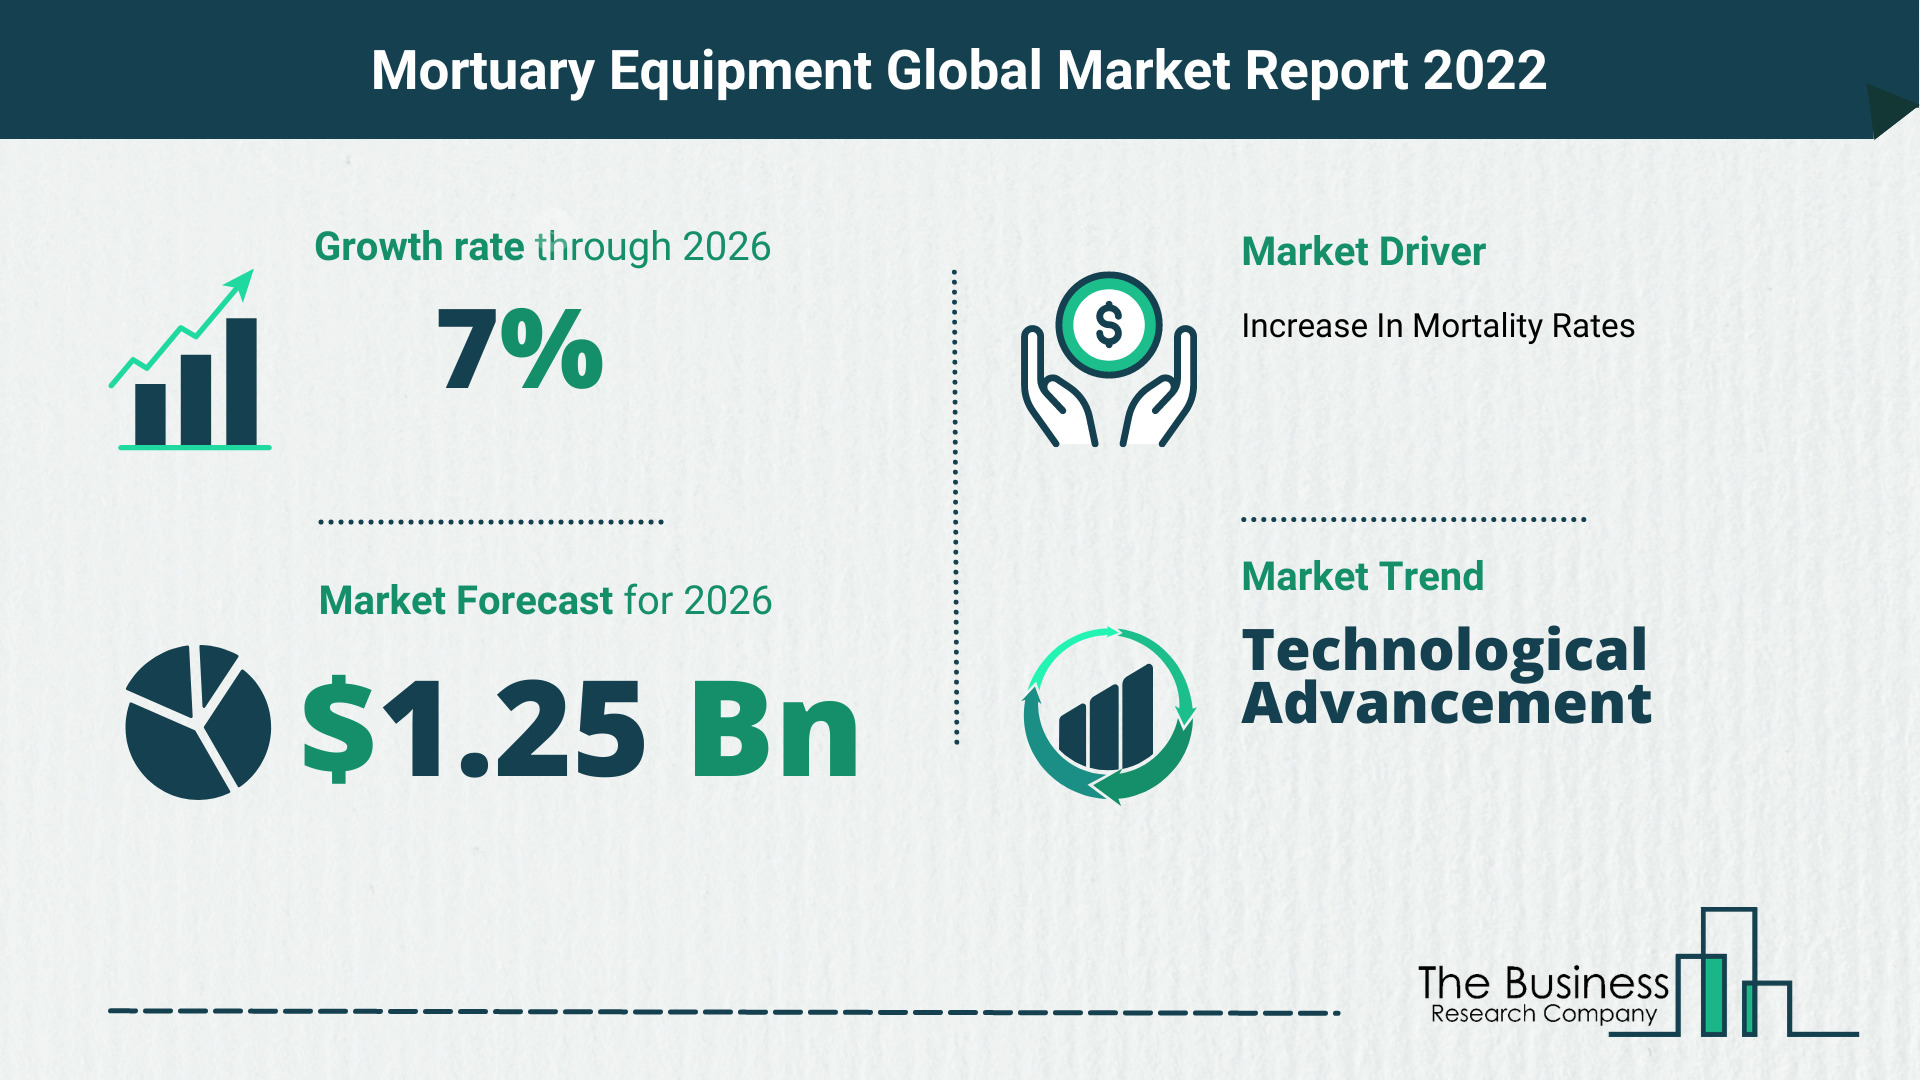 Latest Mortuary Equipment Market Growth Study 2022-2026 By The Business Research Company